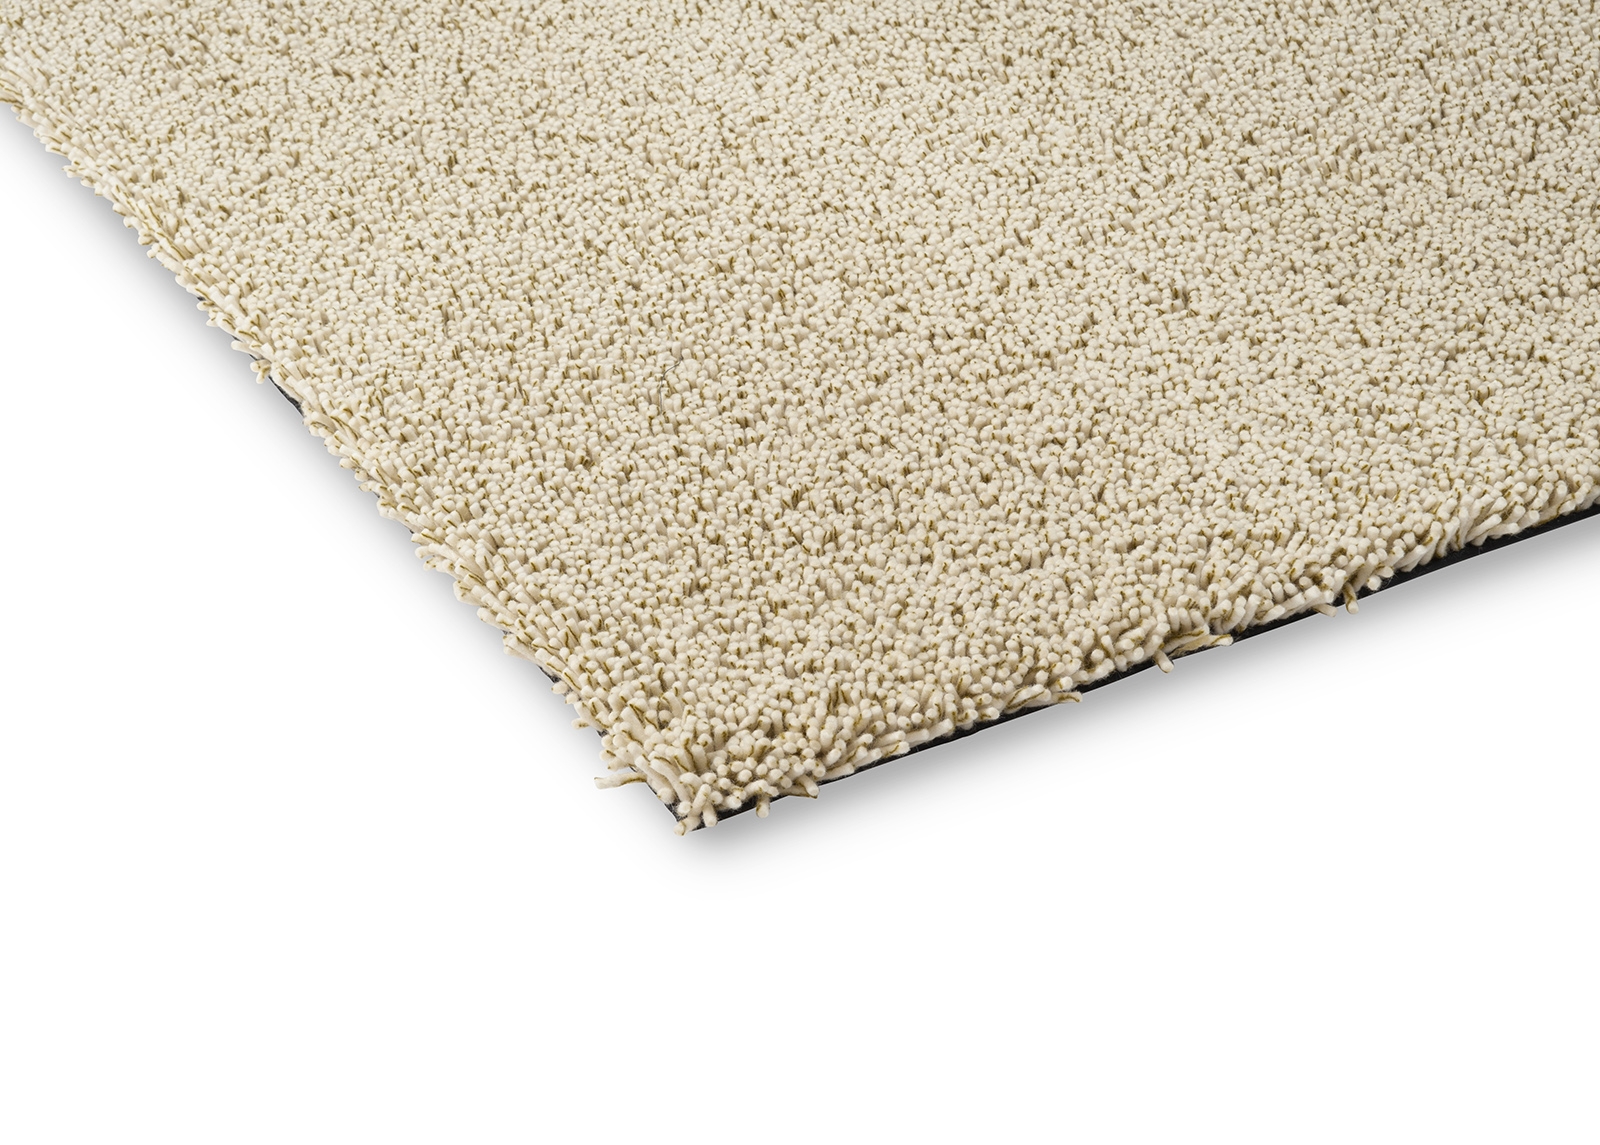 Trace Cut Pile Olive Green 120917 Rug